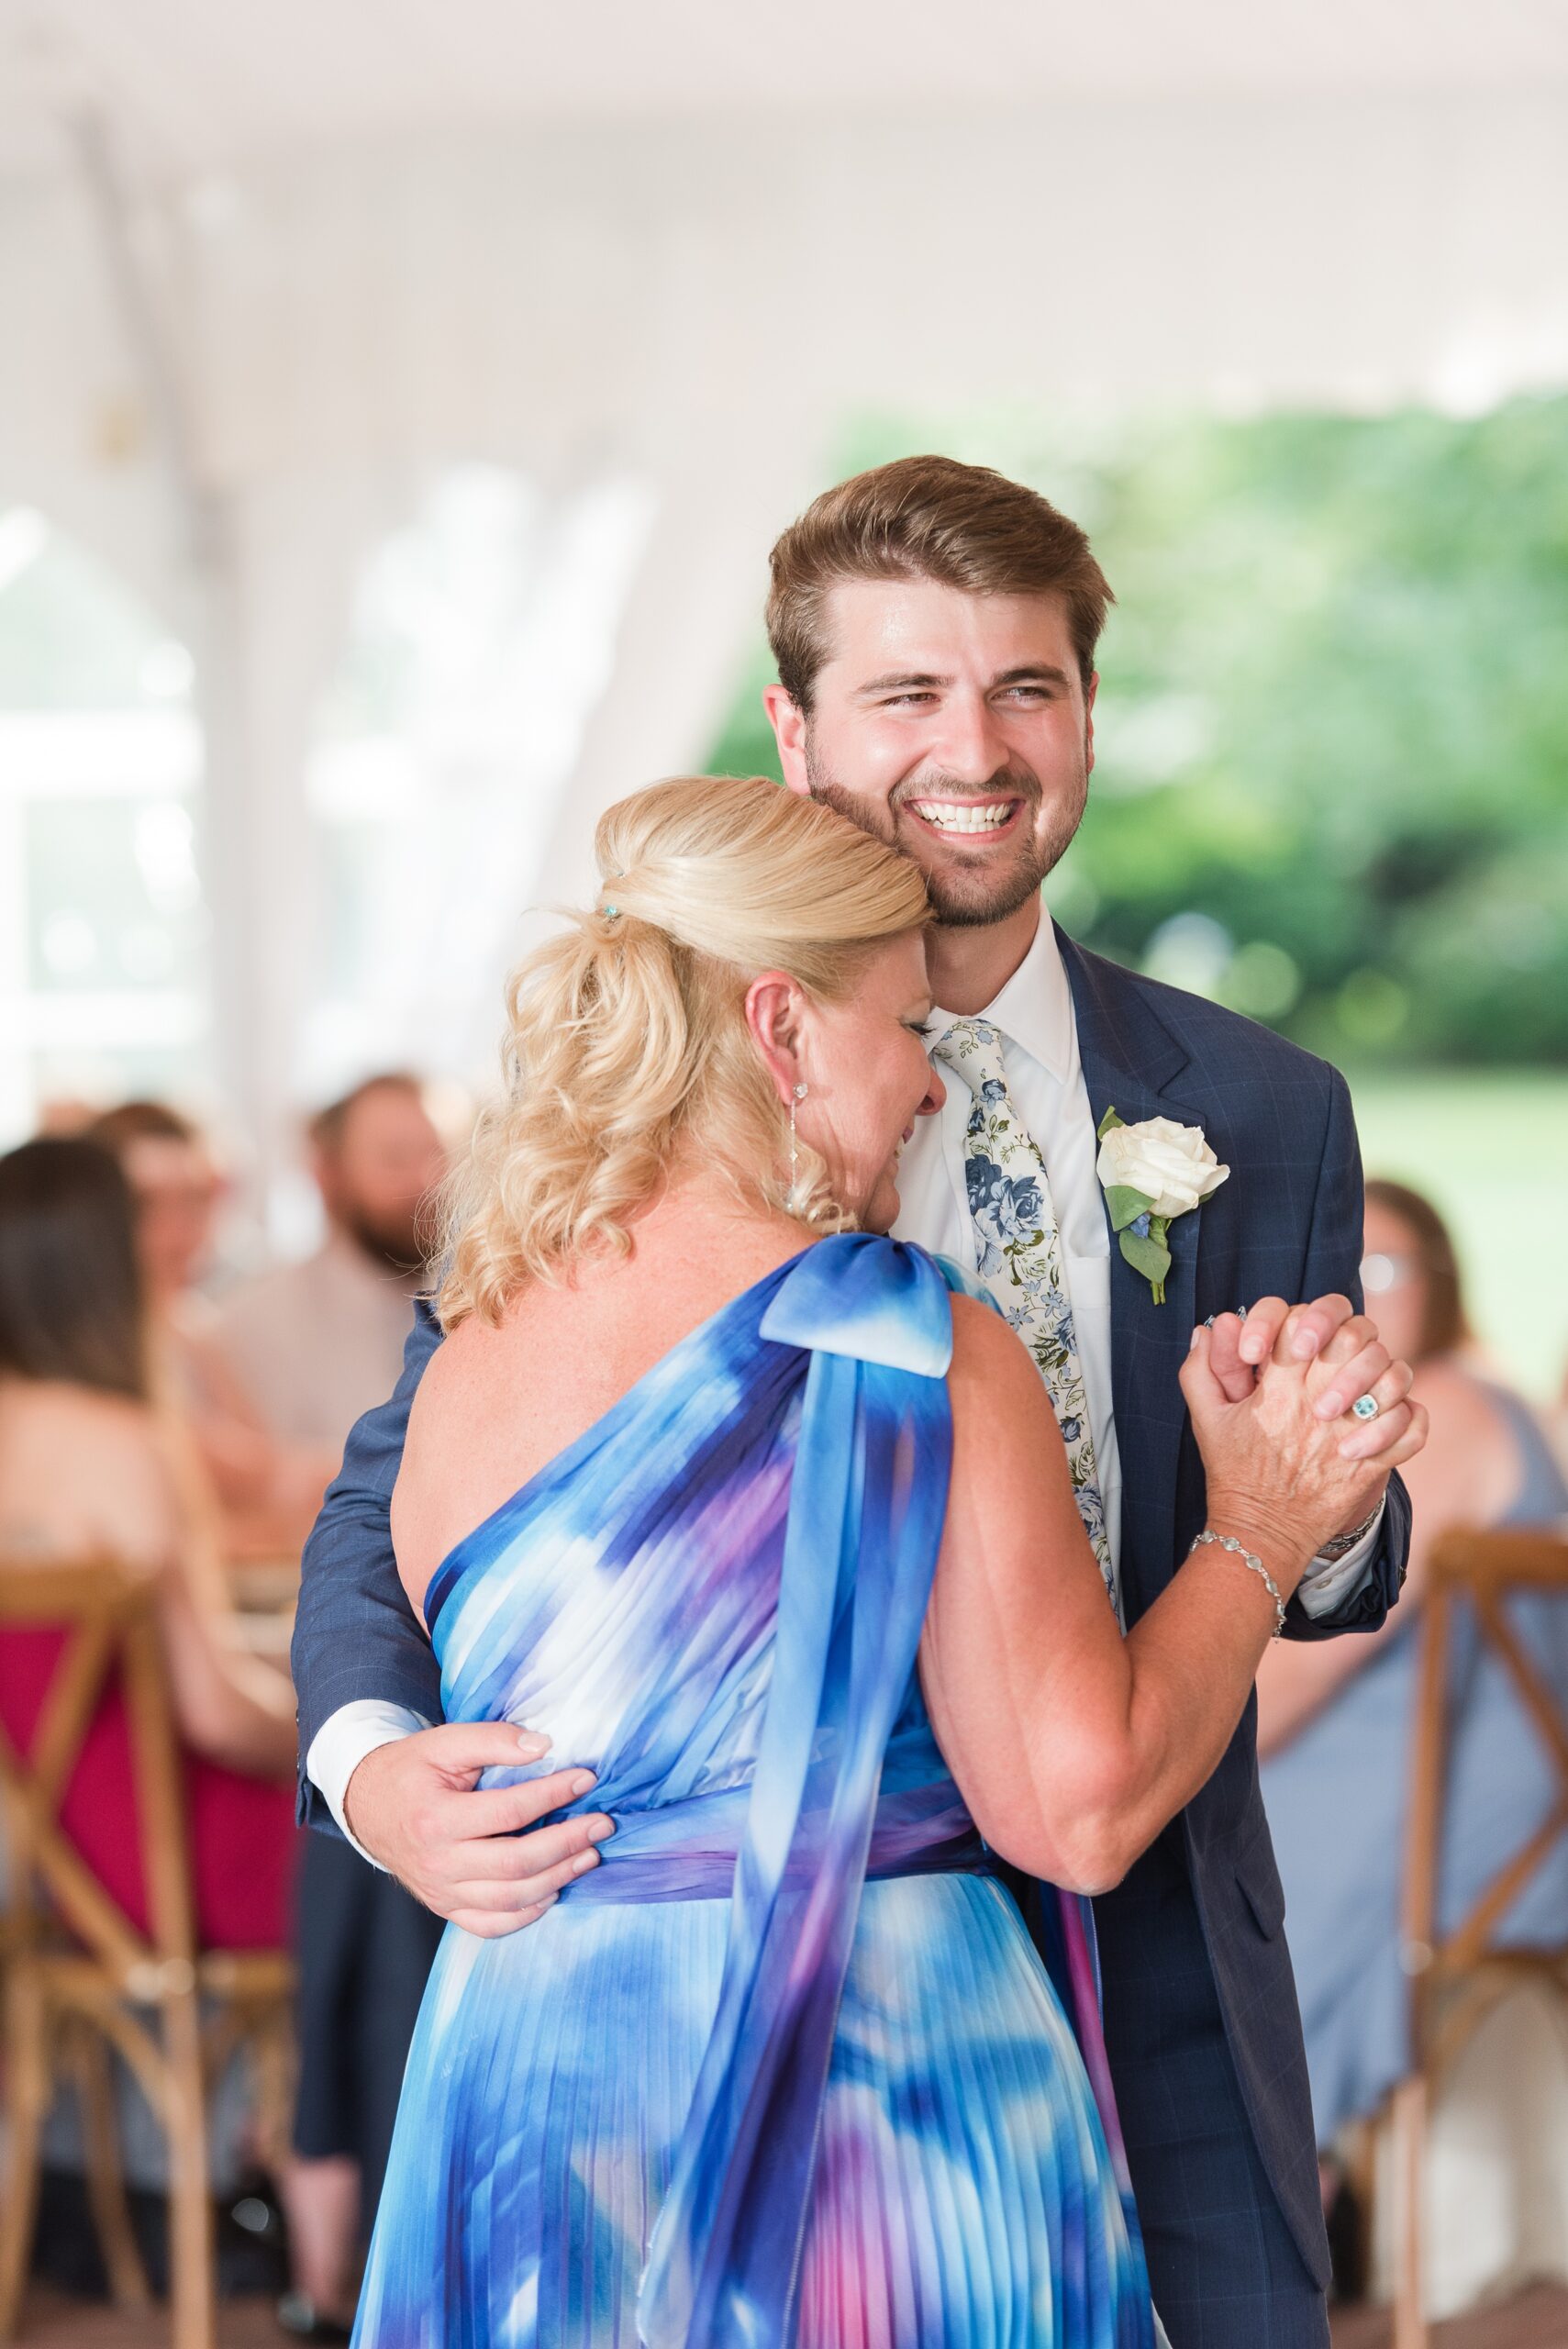 A groom in a blue suit dances with him mom with big smiles during his wedding reception